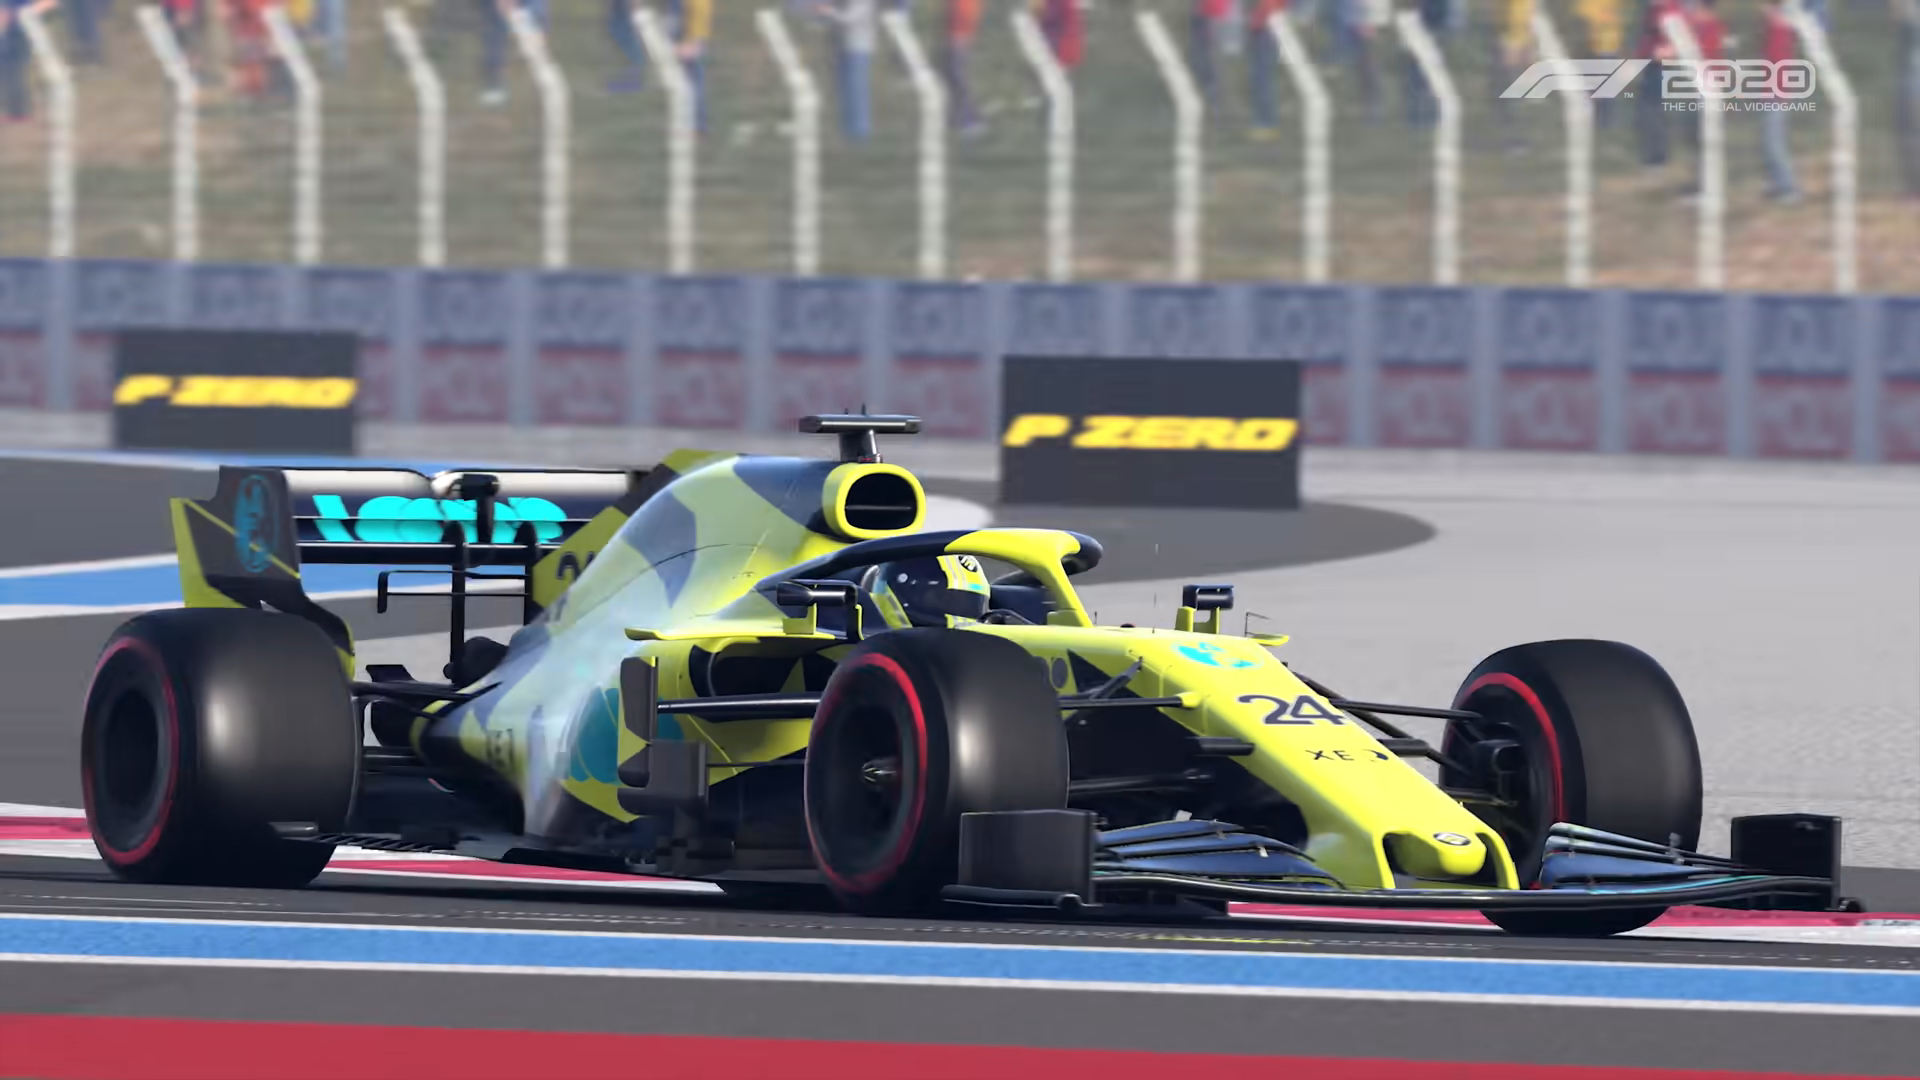  How to customize your driver in F1 2020 